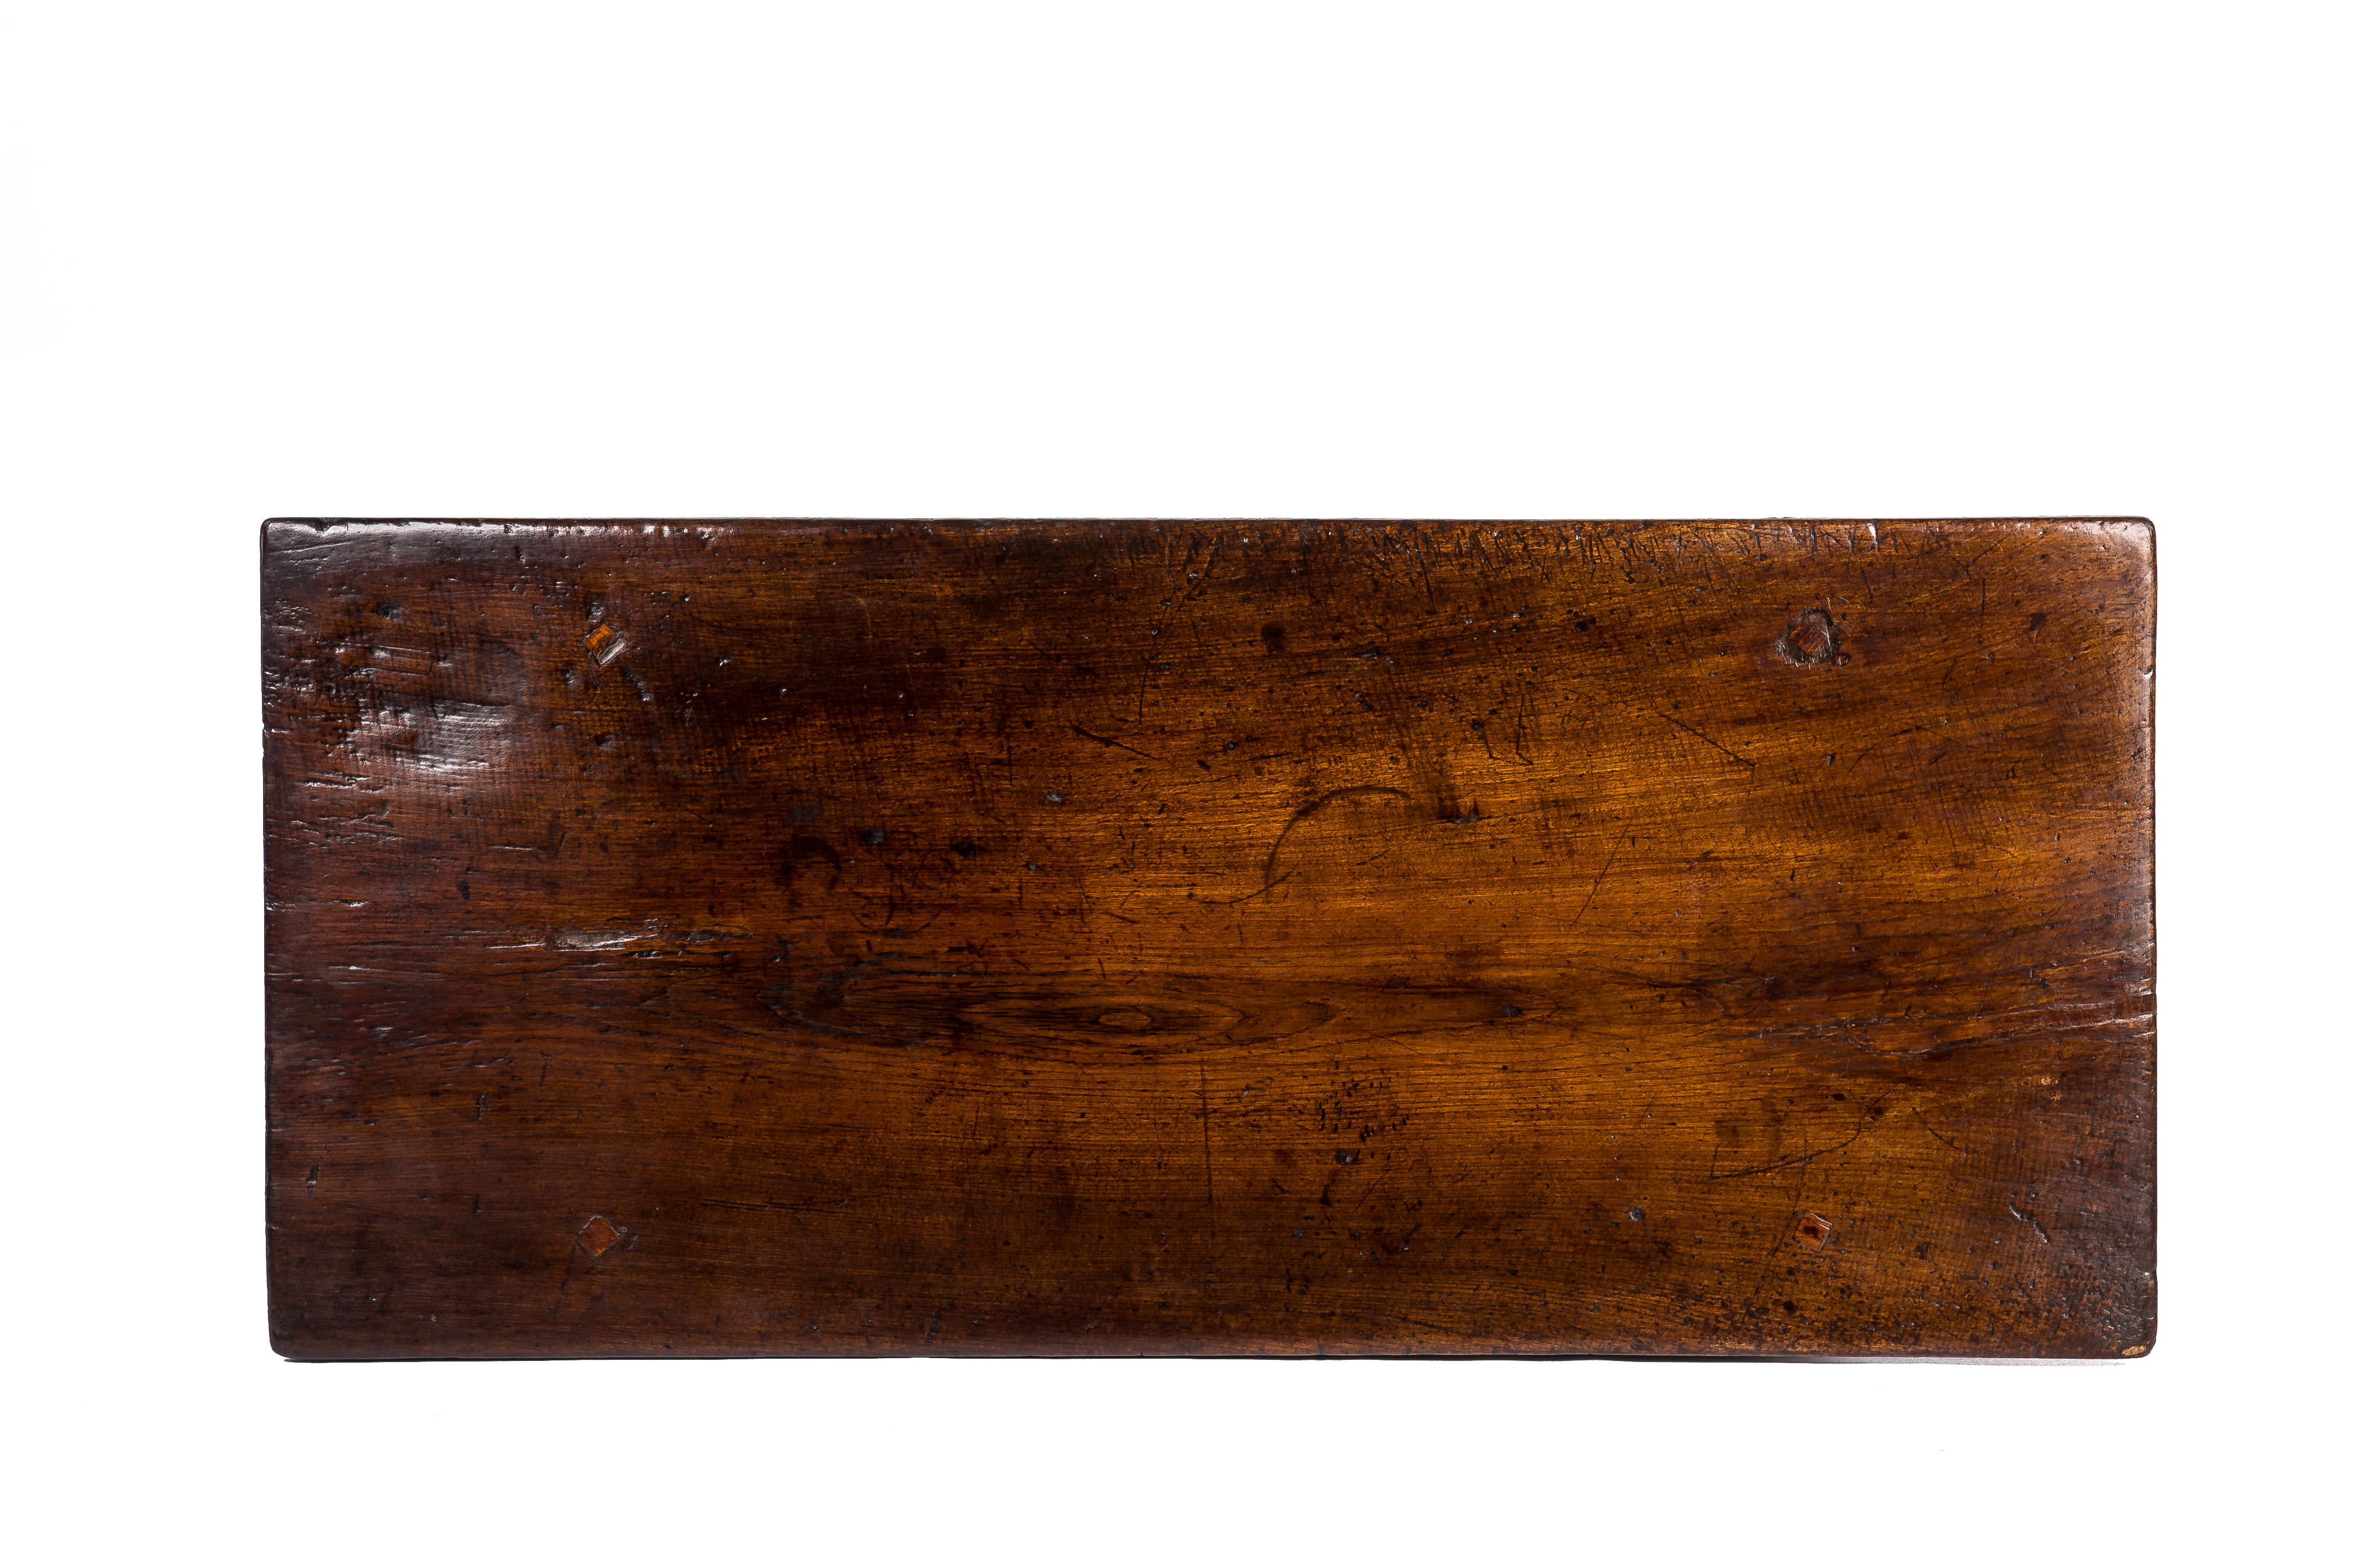 This fantastic coffee table was completely made in solid chestnut and originates in Spain circa 1650. Its large top is made from a single board of 1.2 inches thick solid chestnut with a beautiful grain pattern. The top shows the marks of over 350